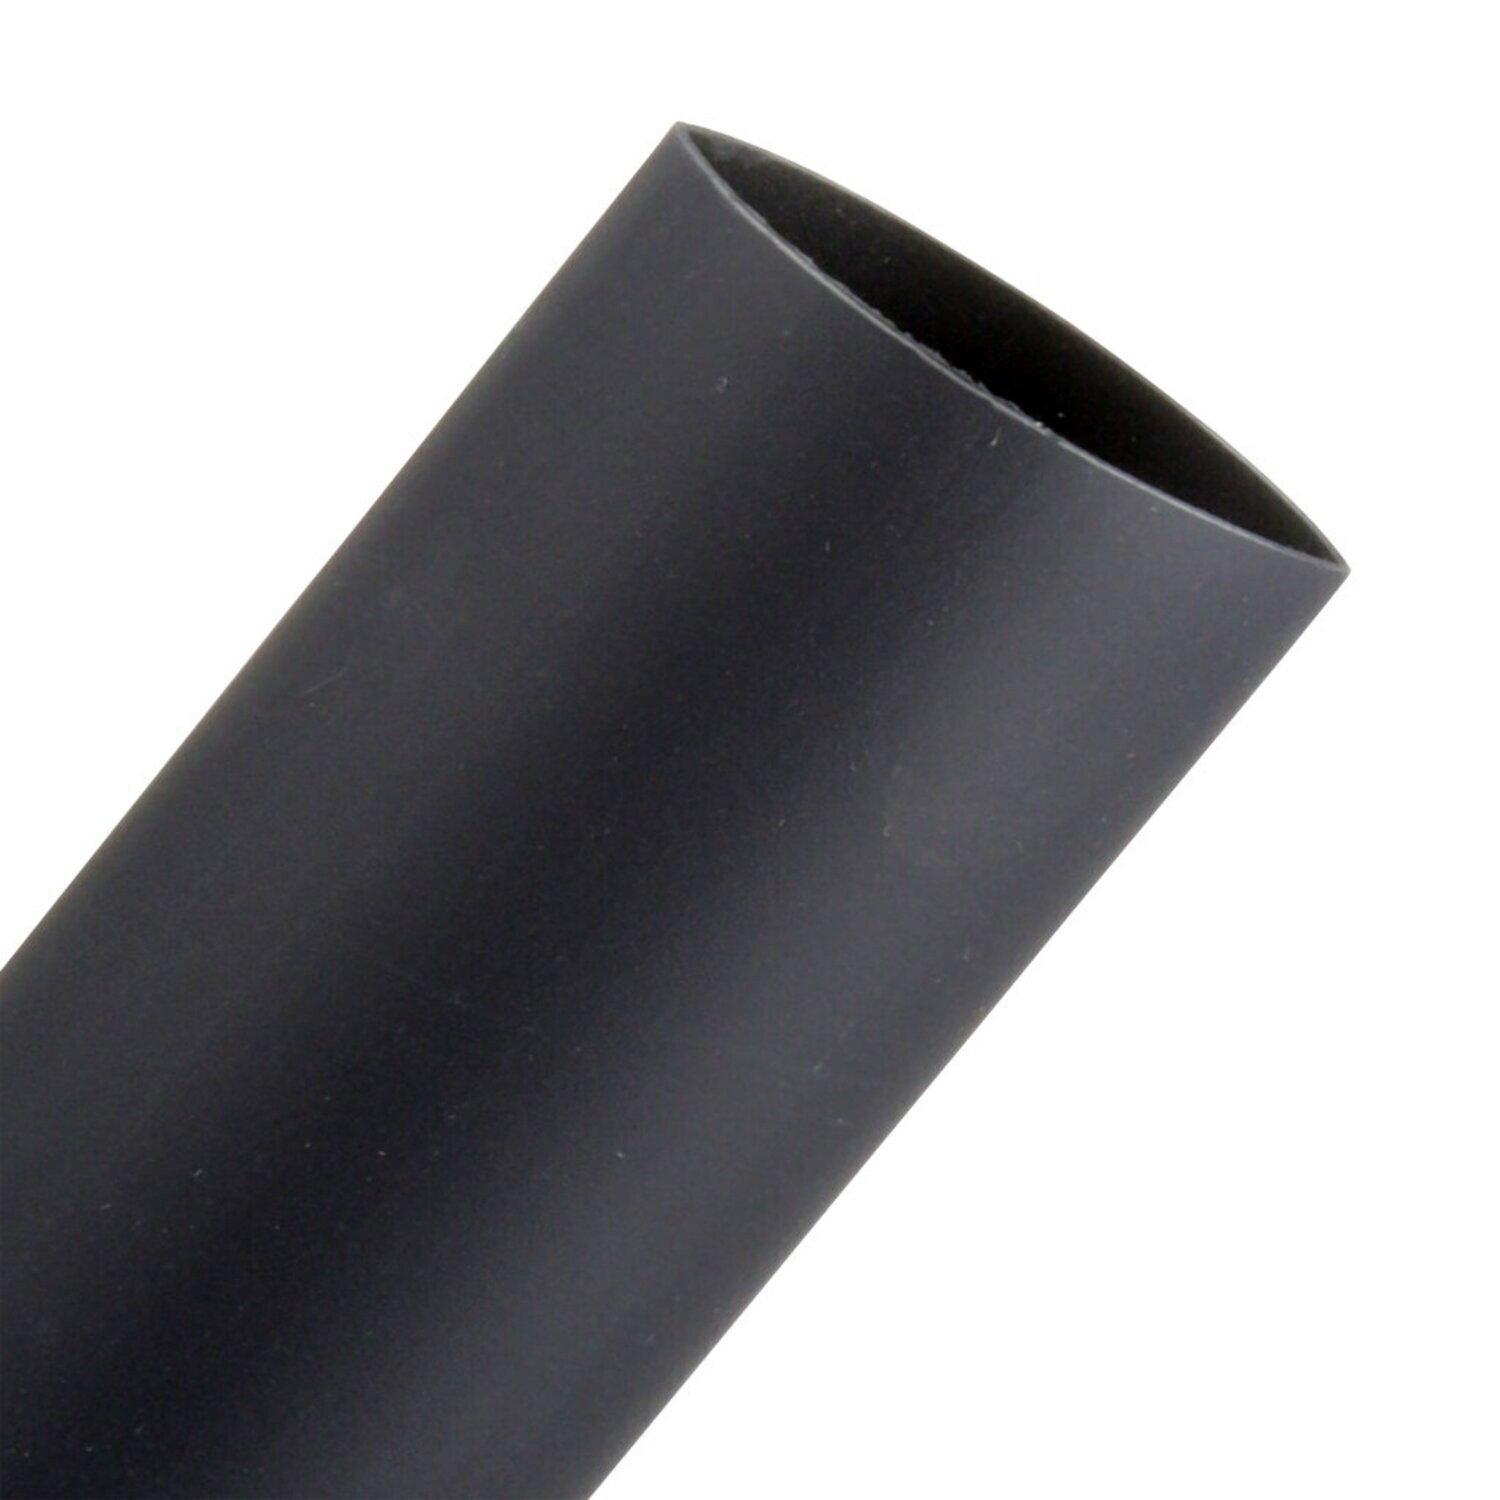 7000133520 - 3M Heat Shrink Thin-Wall Tubing FP-301-1-48"-Black-5 Pcs, 48 in Length
sticks, 5 pieces/case